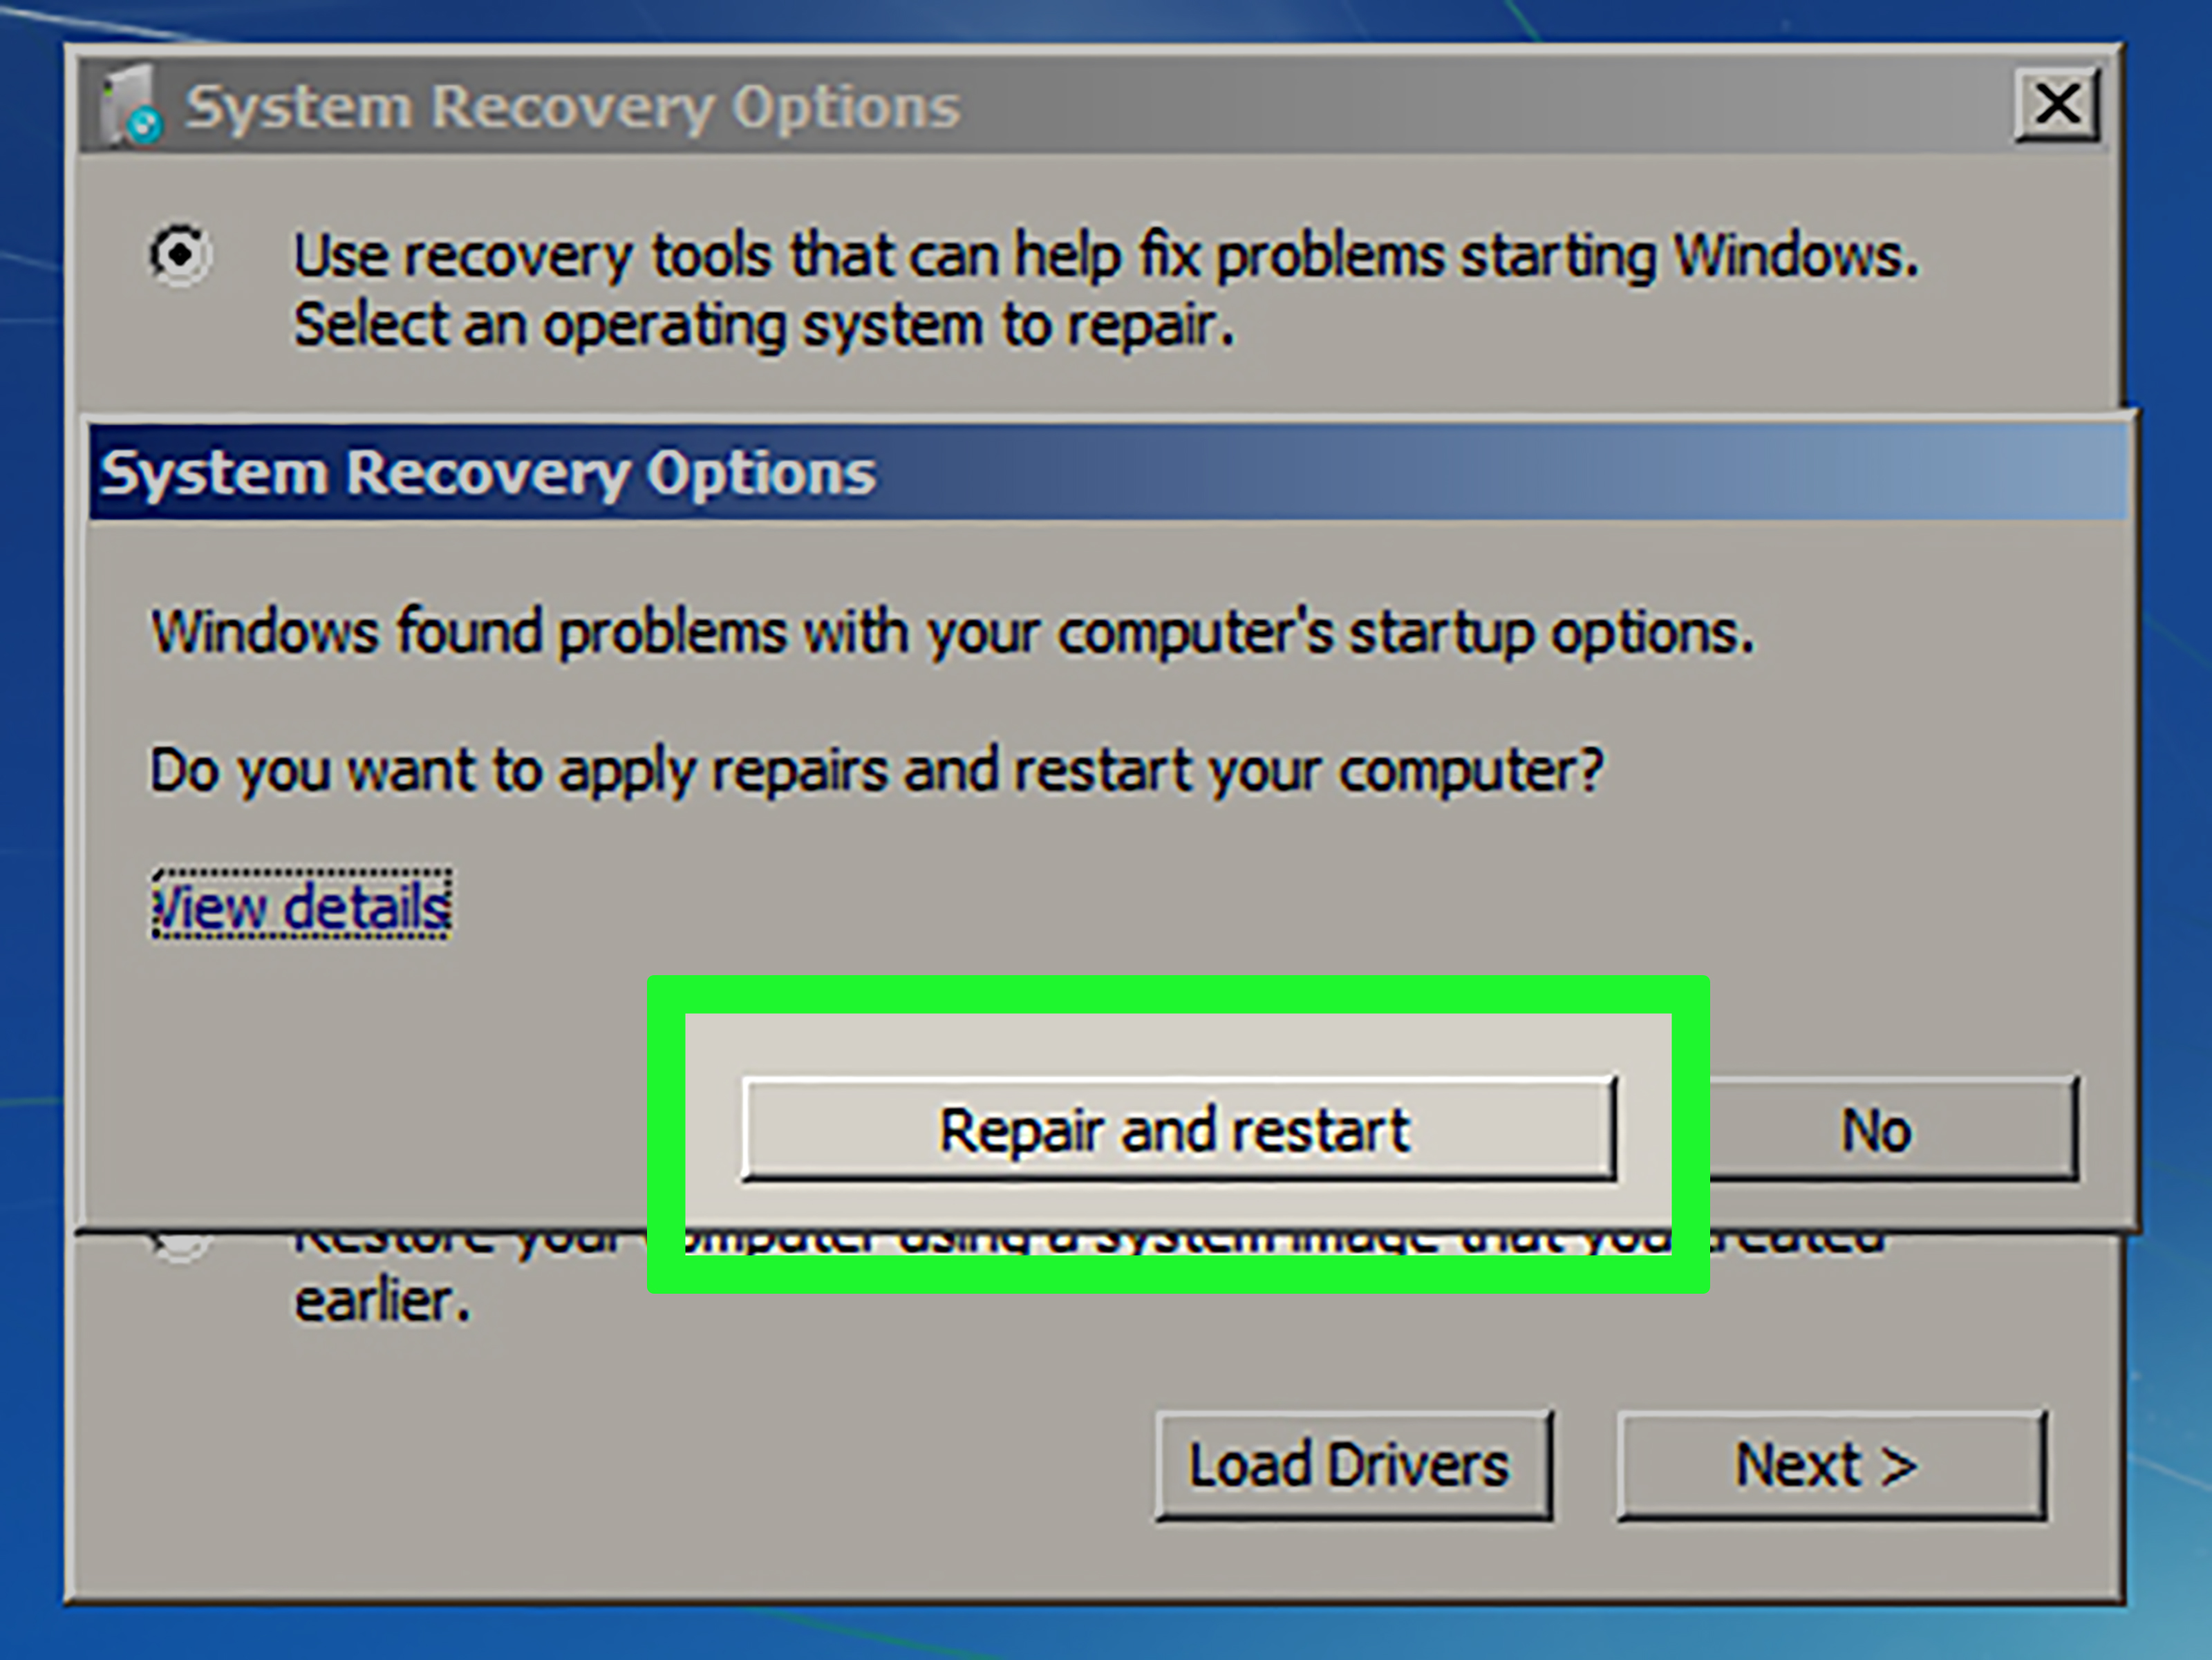 Click on the "Repair" or "Fix" button to start the repair process
Follow the on-screen instructions provided by the tool to complete the repair process